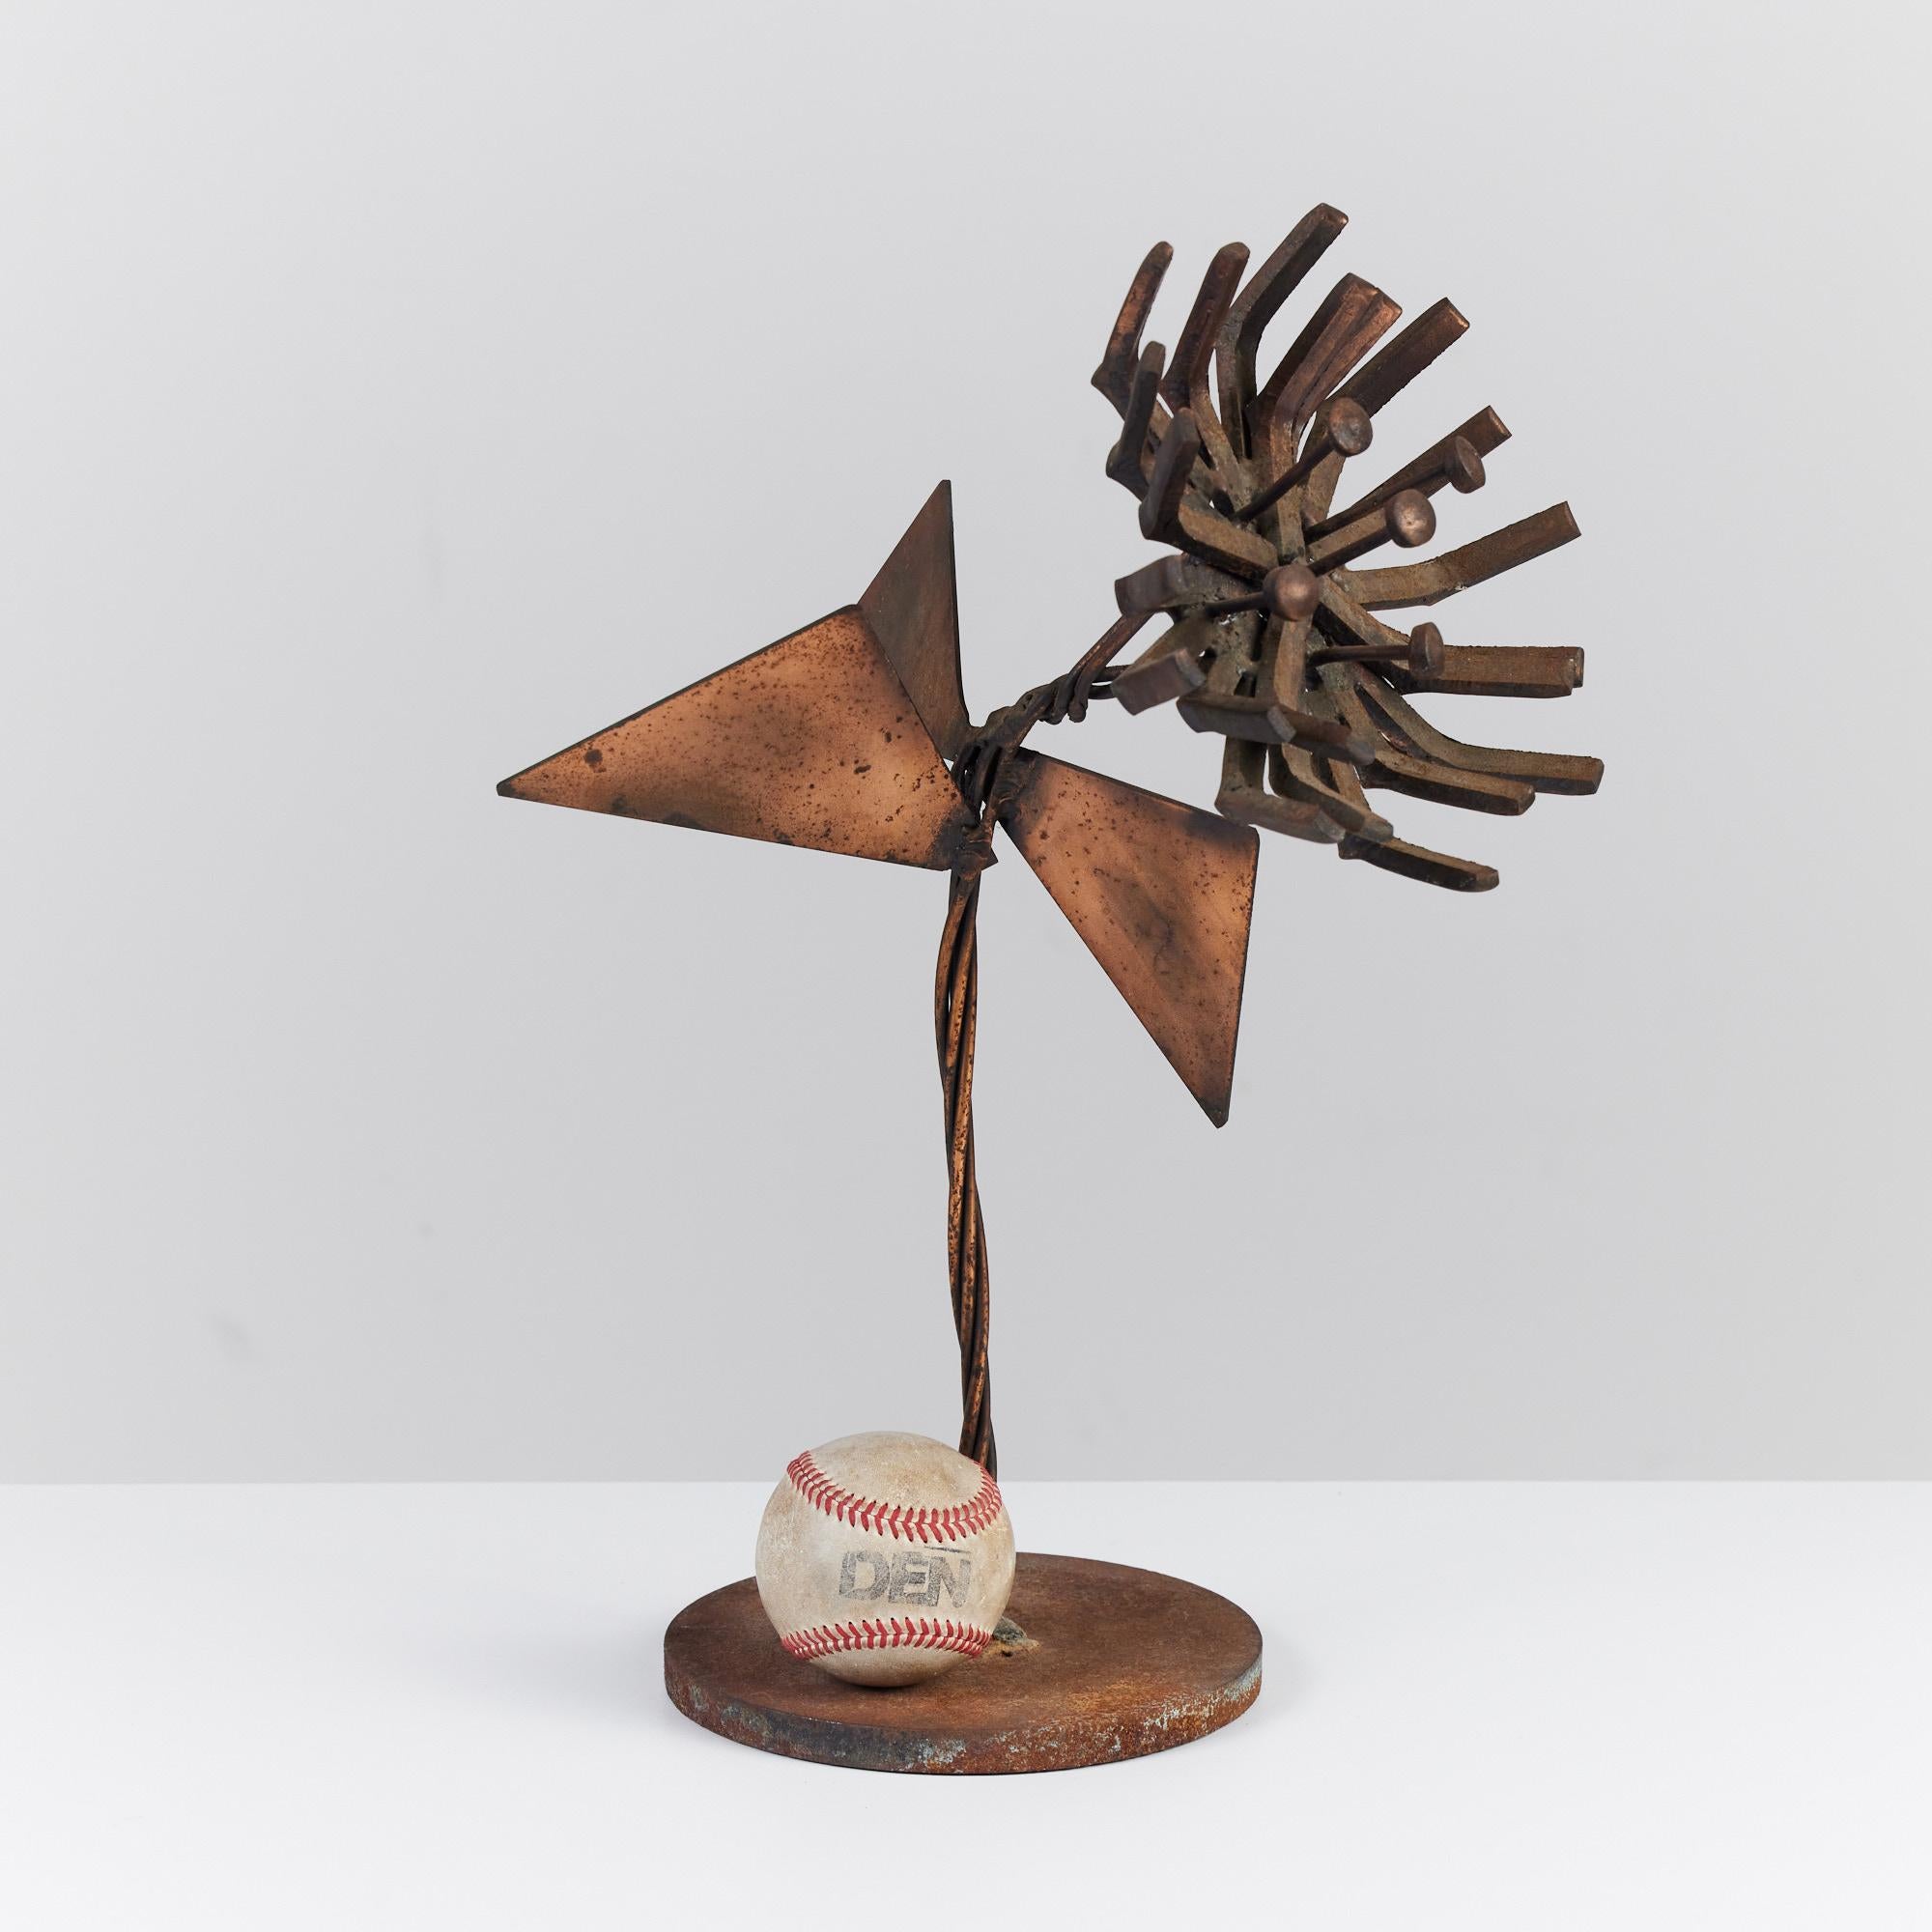 A brutalist mid century flower sculpture in the style of Curtis Jeré. The mounted sculpture features a twisted stem that branches out to three triangular leaves. The flower features bent metal petals offering a sunburst shape. The patina is